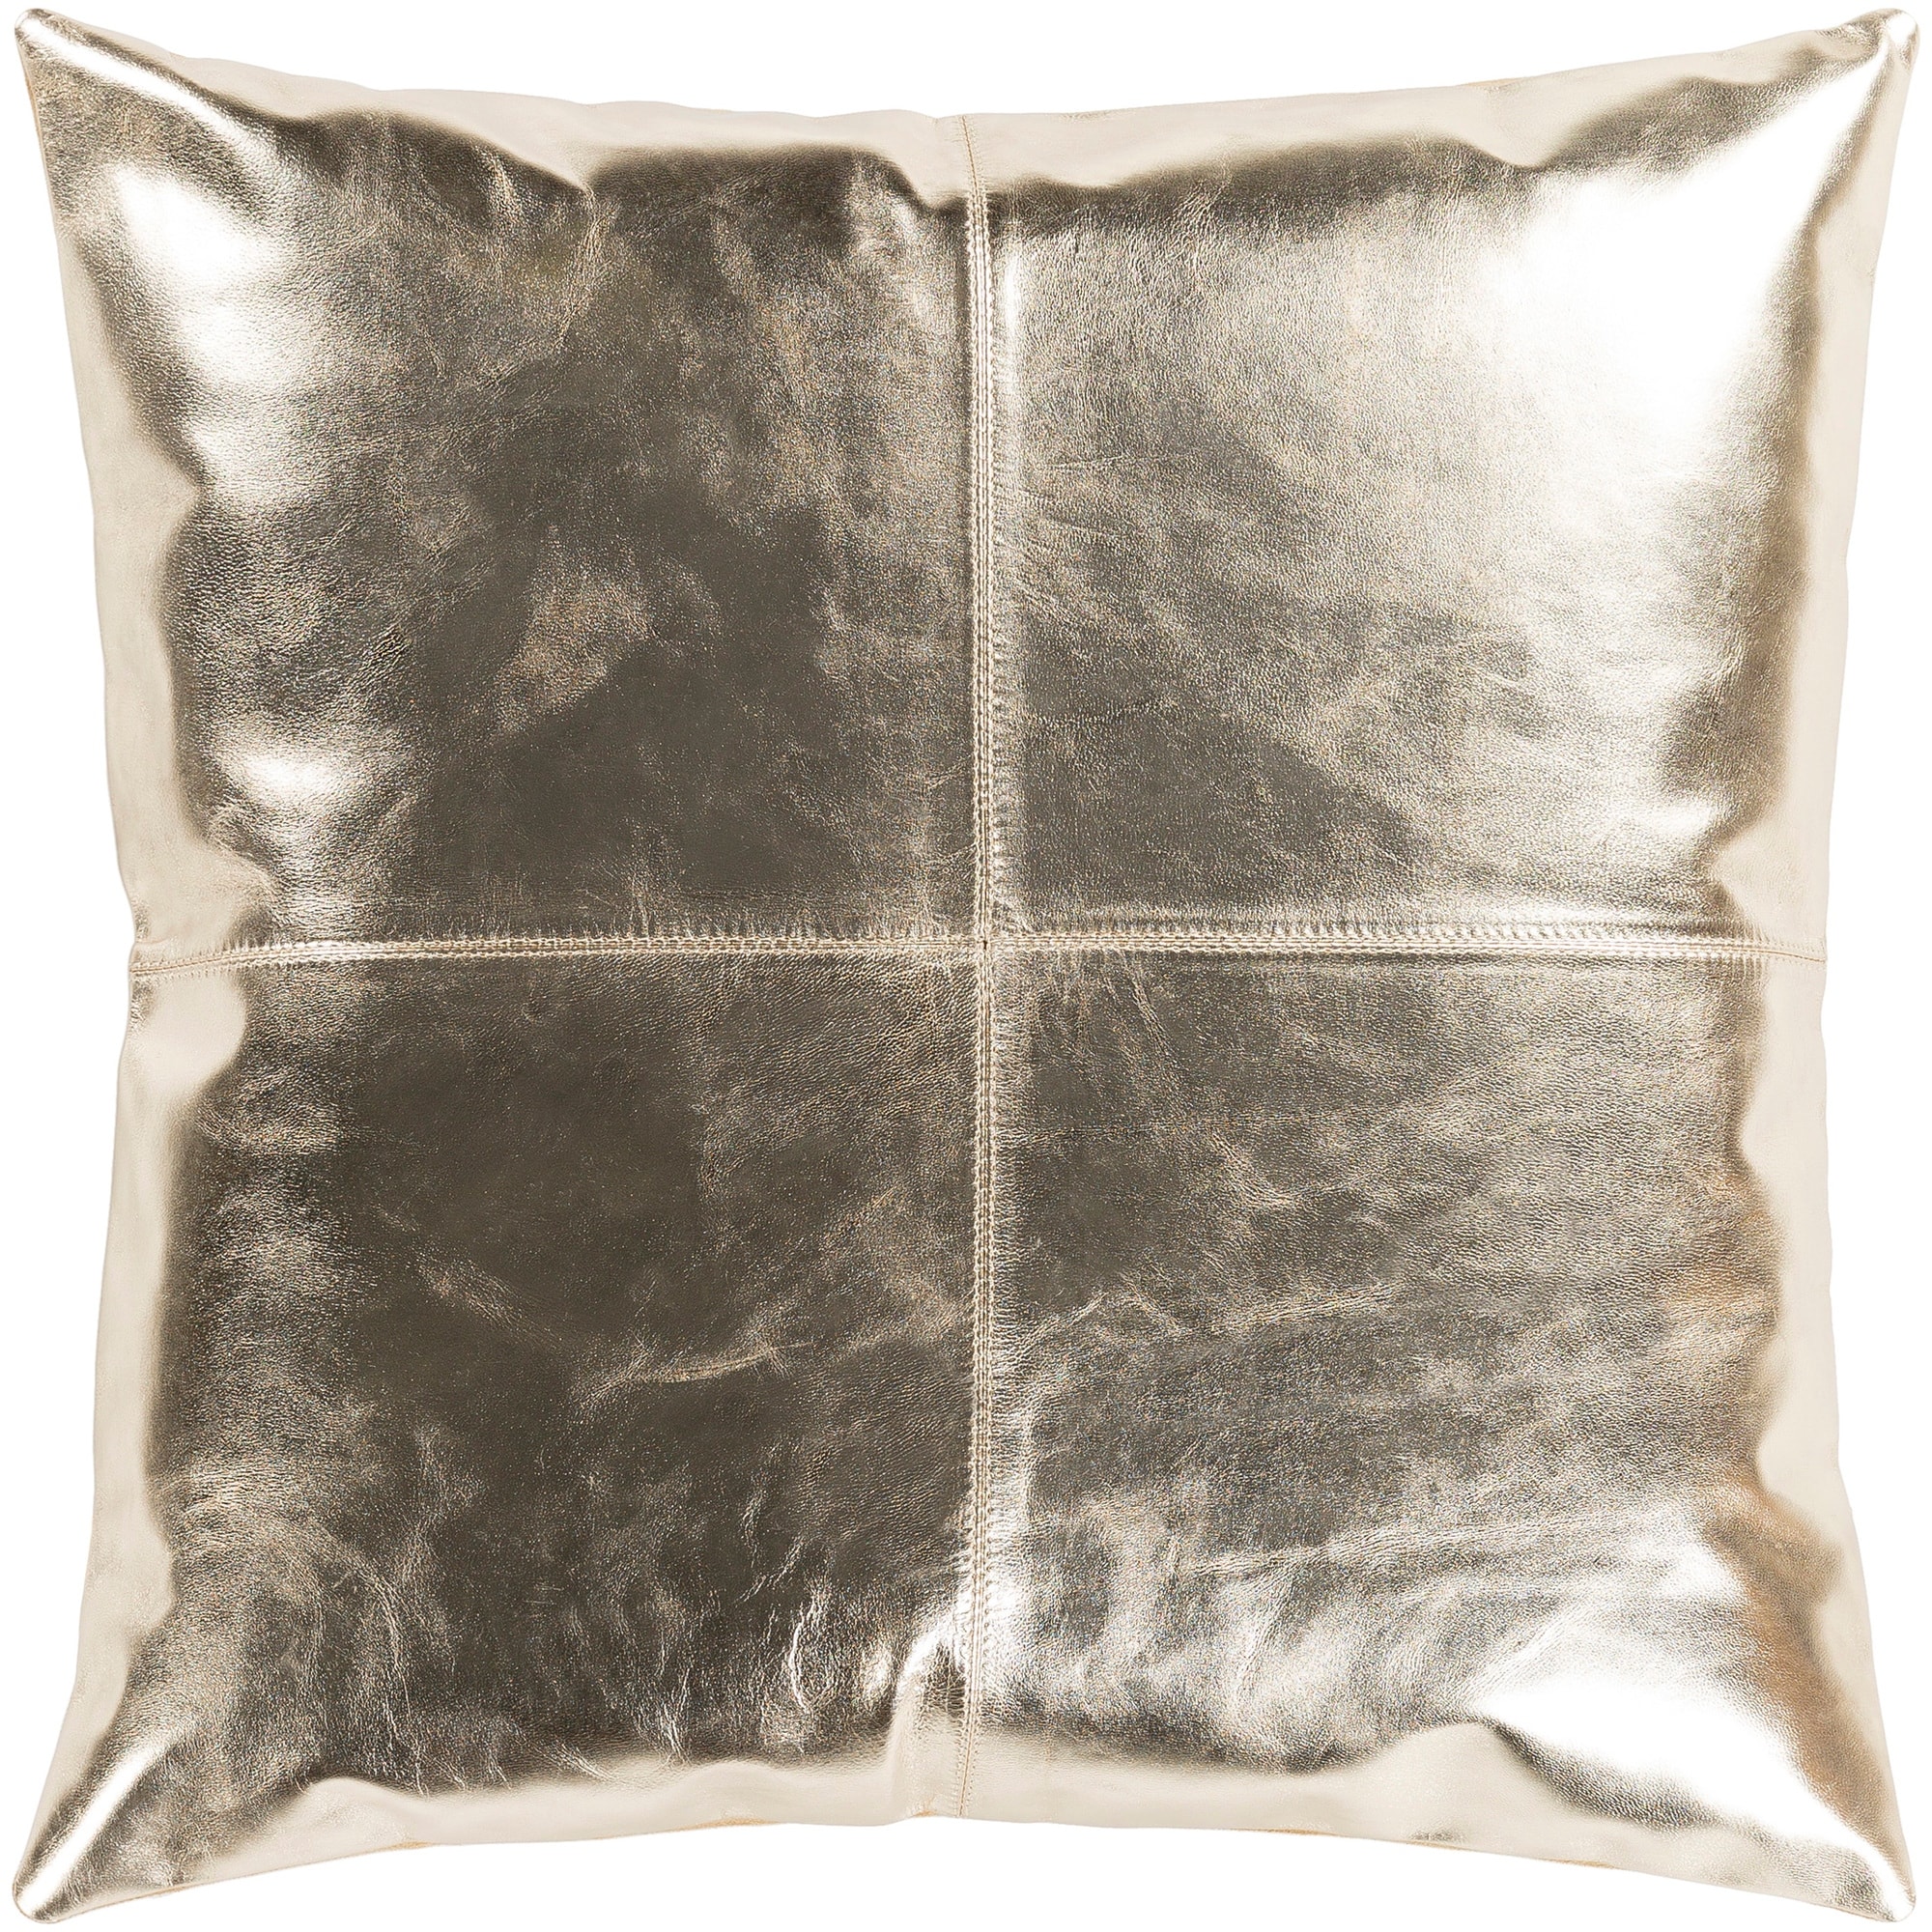 Signature Champagne Leather Feather Down Throw Pillow (18" x 18")